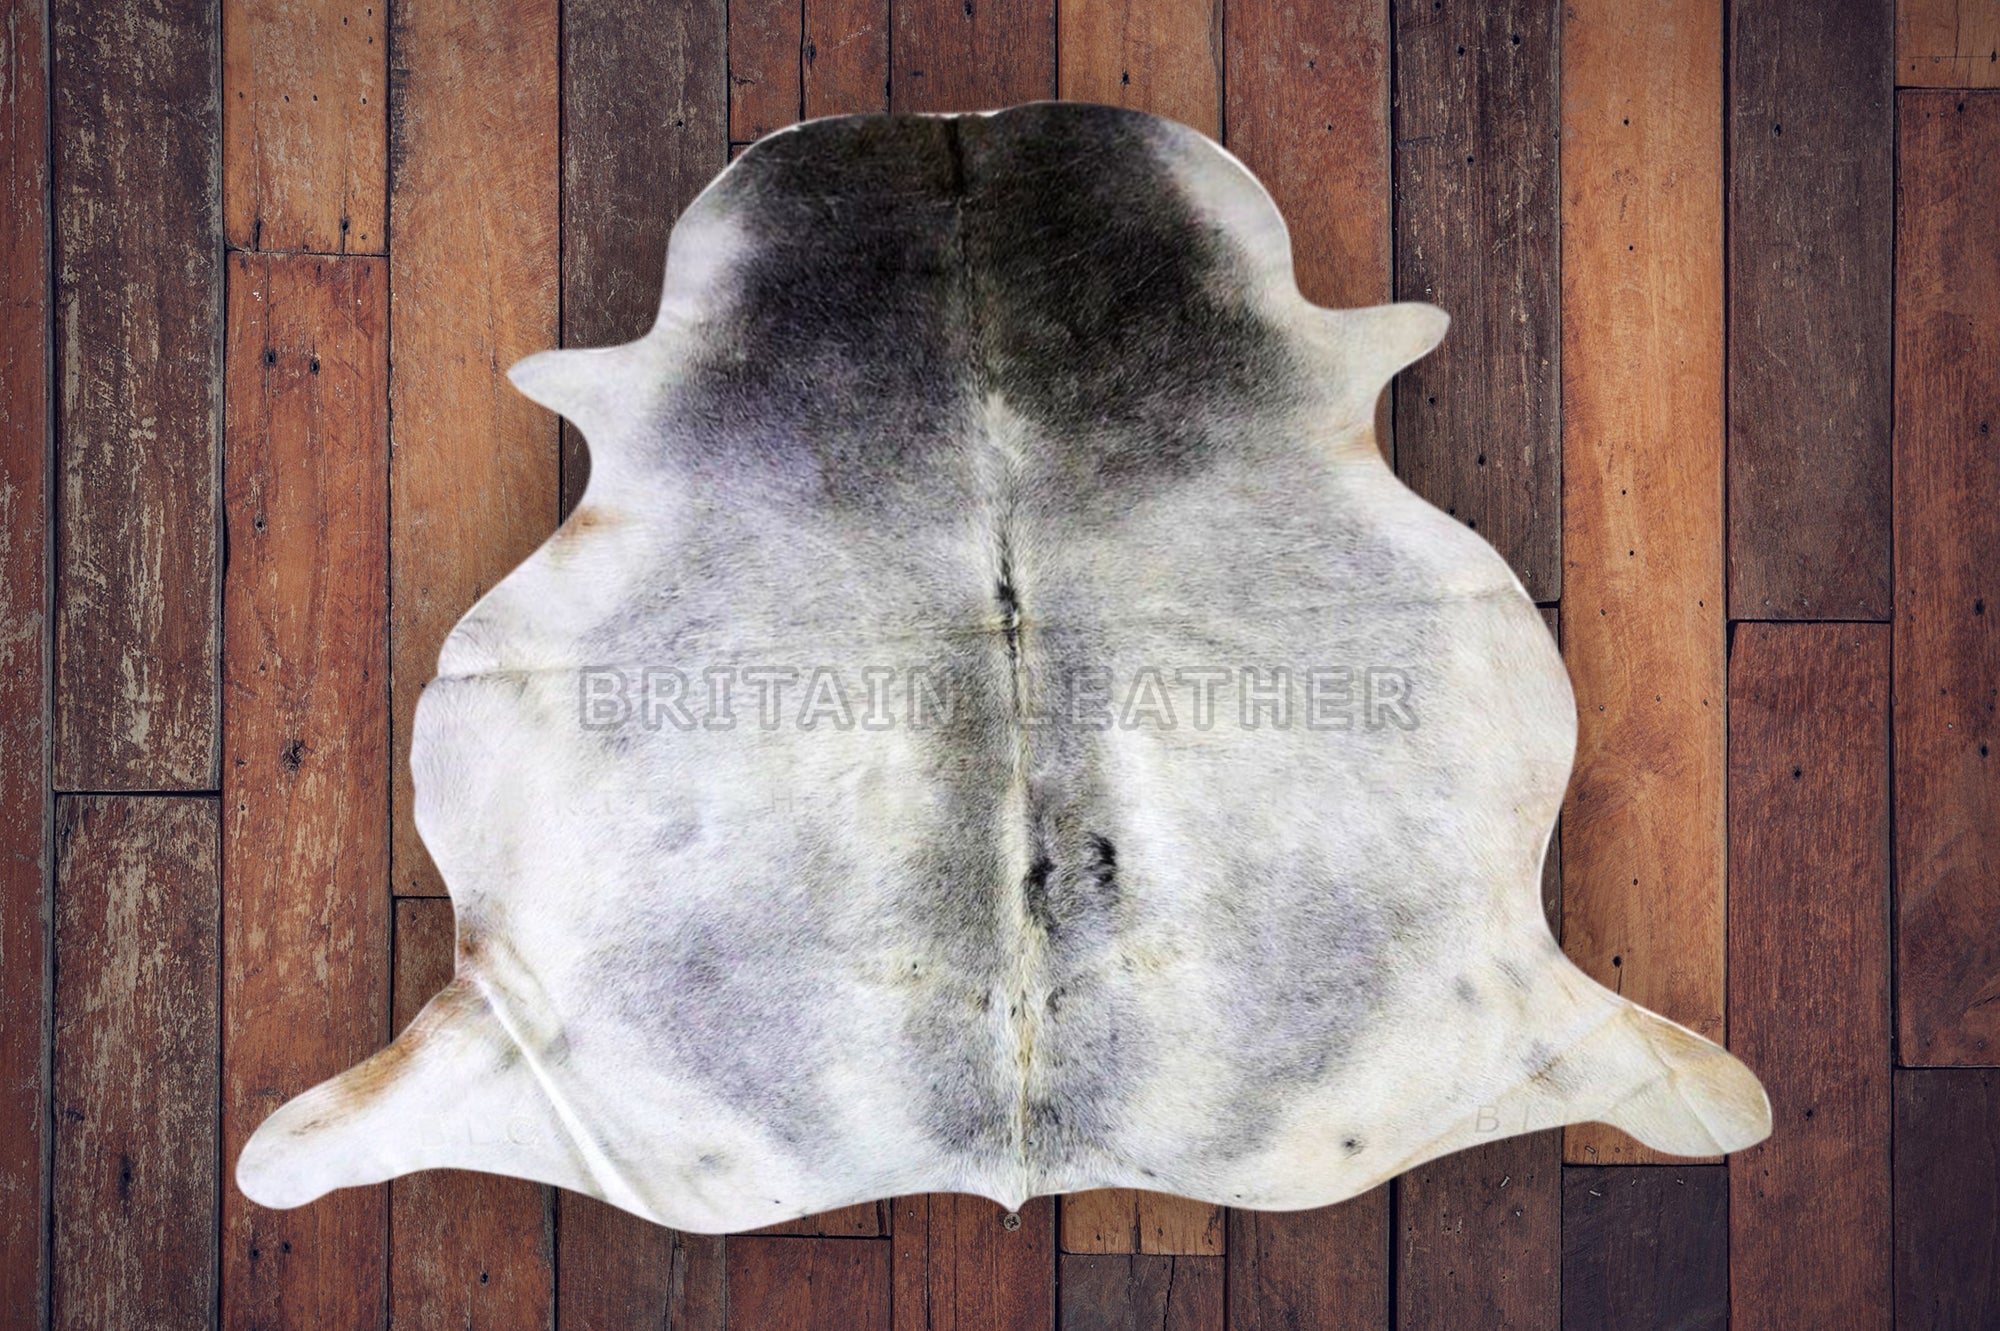 Natural Cowhide Area Rug - Real Hair on Cow hide Leather Rug - Soft Smooth Cow Skin Fur Rug ( 65" X 68" ) - SAME AS PIC